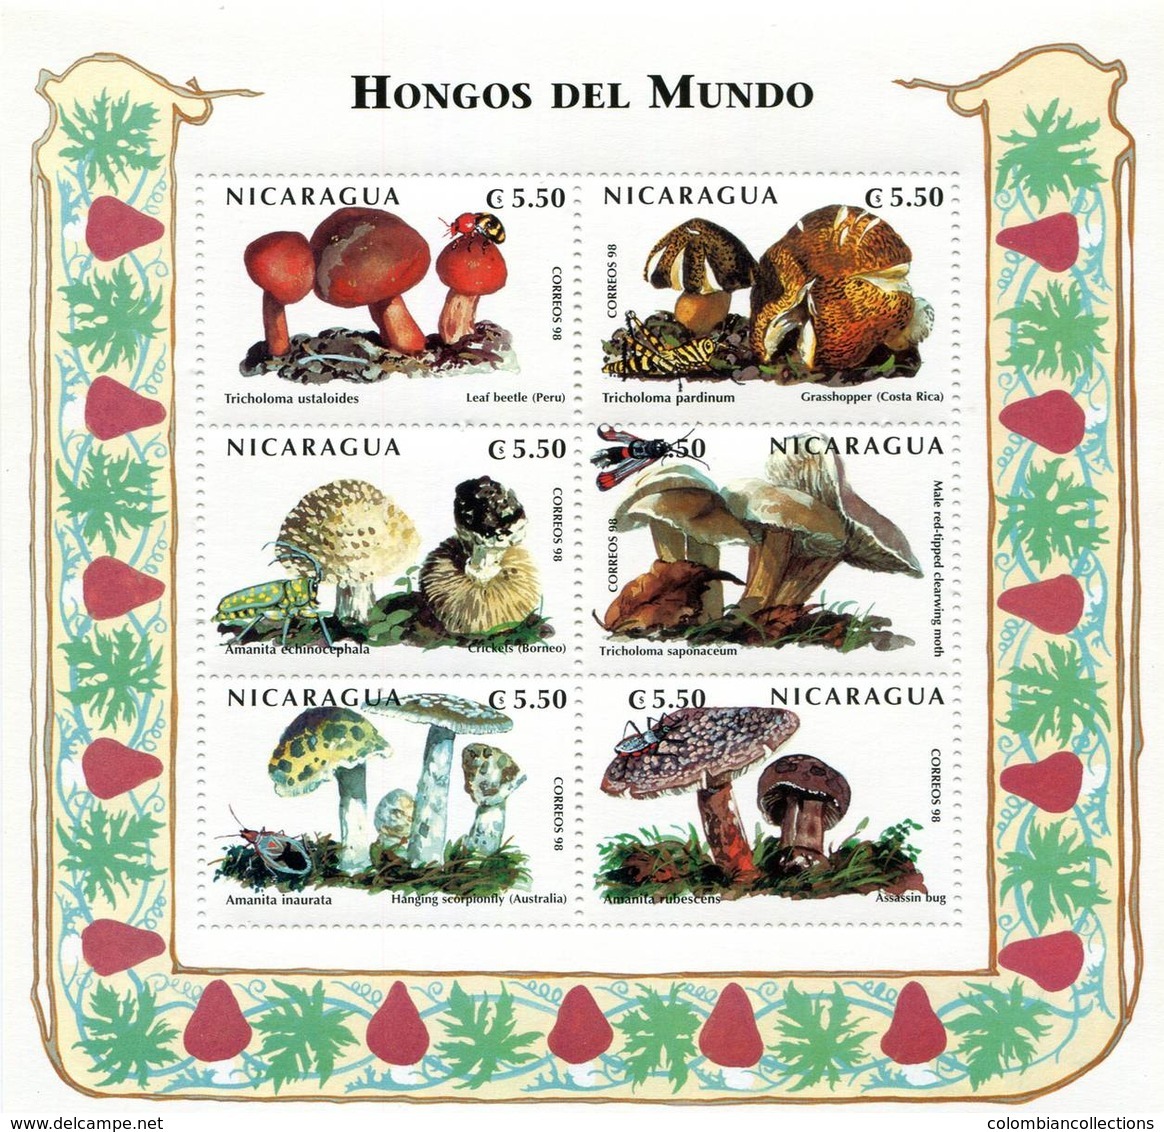 Lote 2289 Nicaragua, 1998, Pliego, Sheet, Hongos E Insectos. Mushrooms And Insects. Tricholoma Ustaloides - Nicaragua